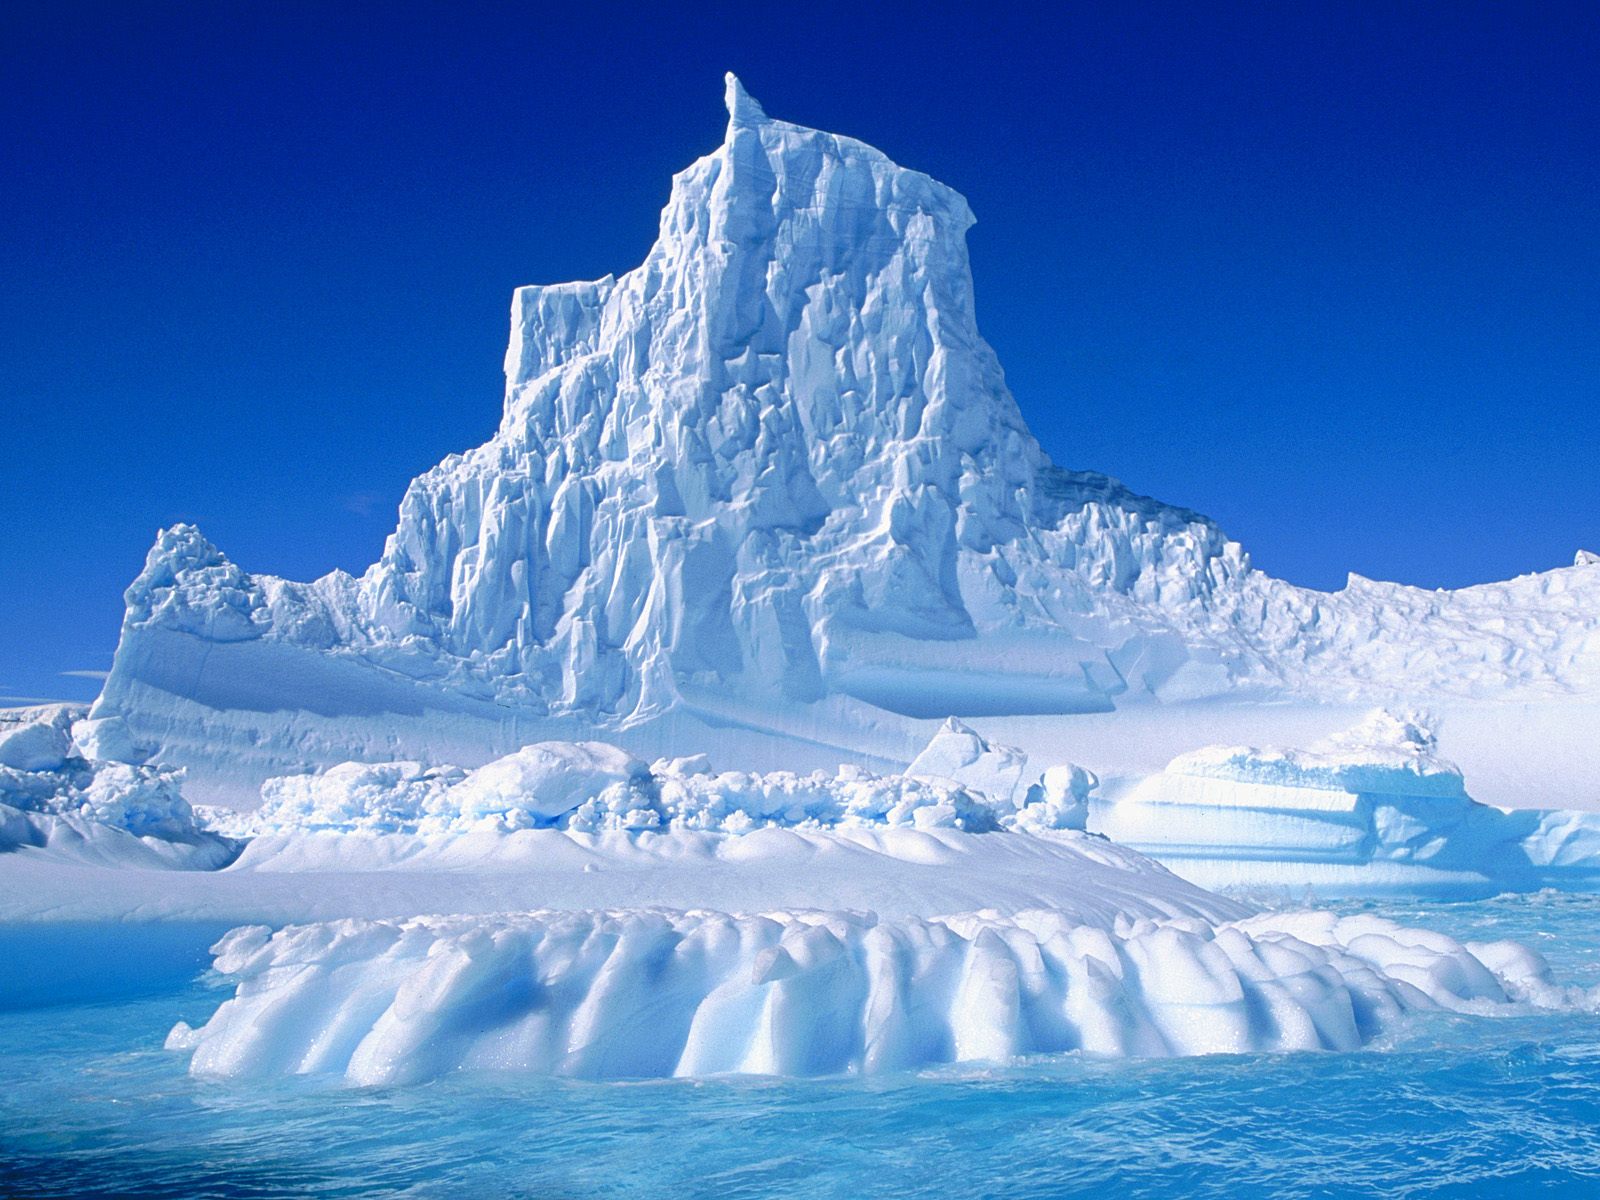 [Eroded+Iceberg+in+the+Lemaire+Channel,+Antarctica-783469.jpg]